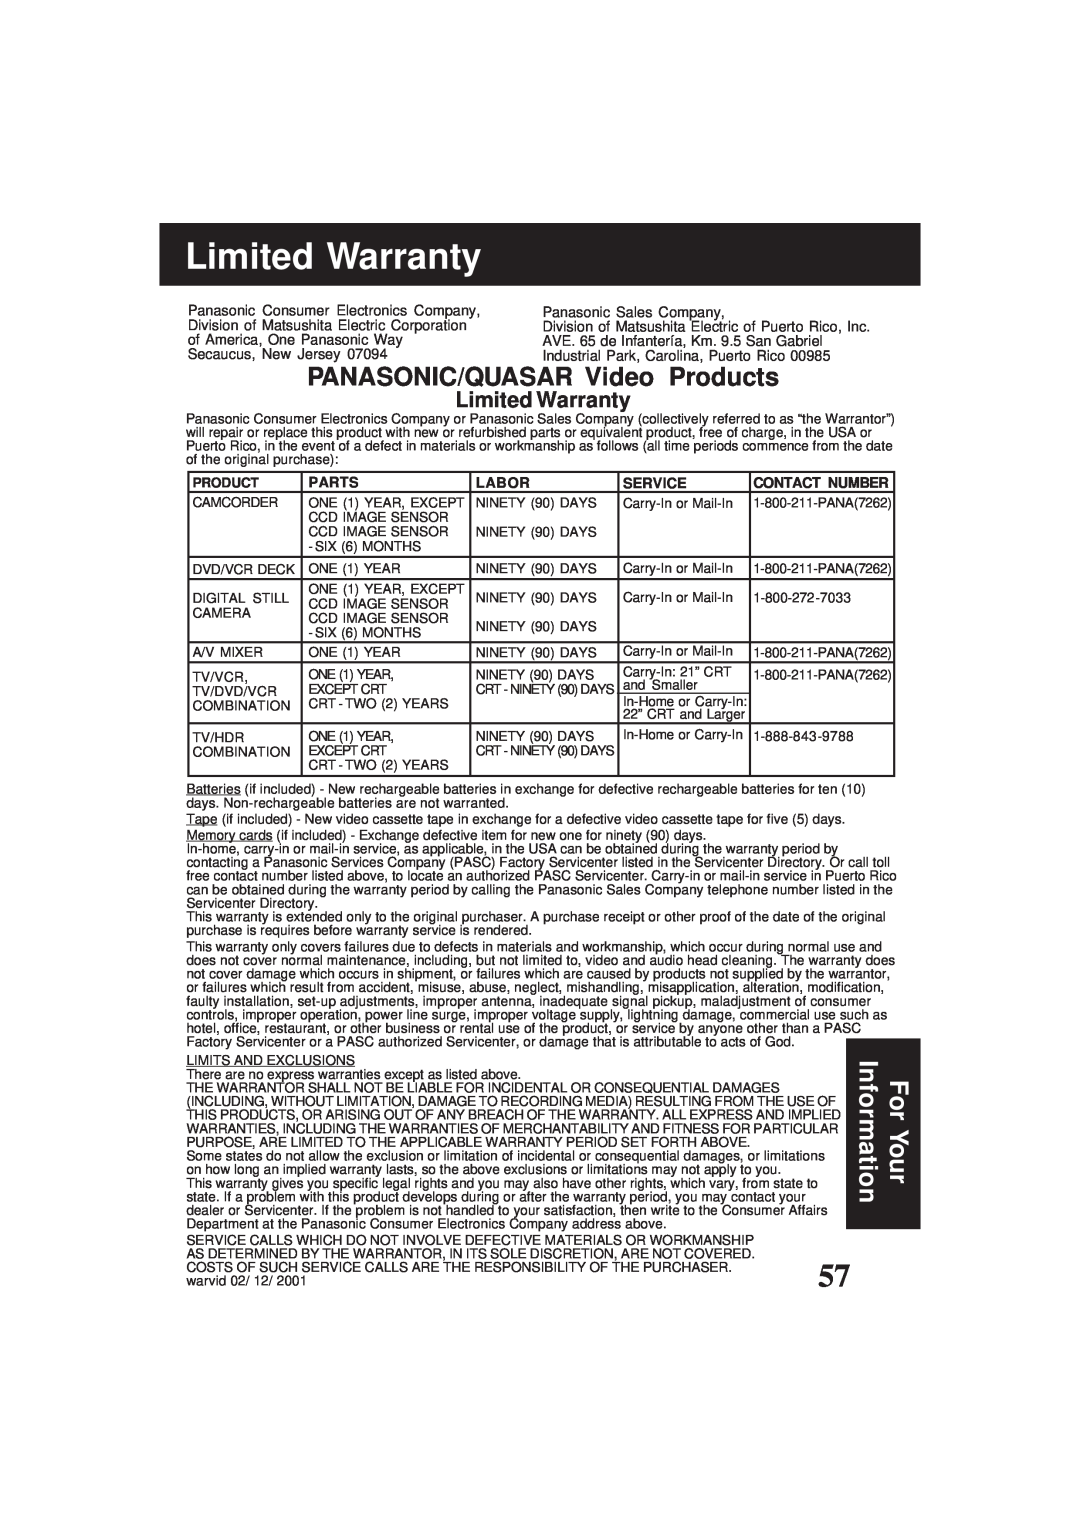 Panasonic PV-D4761 Limited Warranty, For Your Information, PANASONIC/QUASAR Video Products, Parts, Labor, Service 